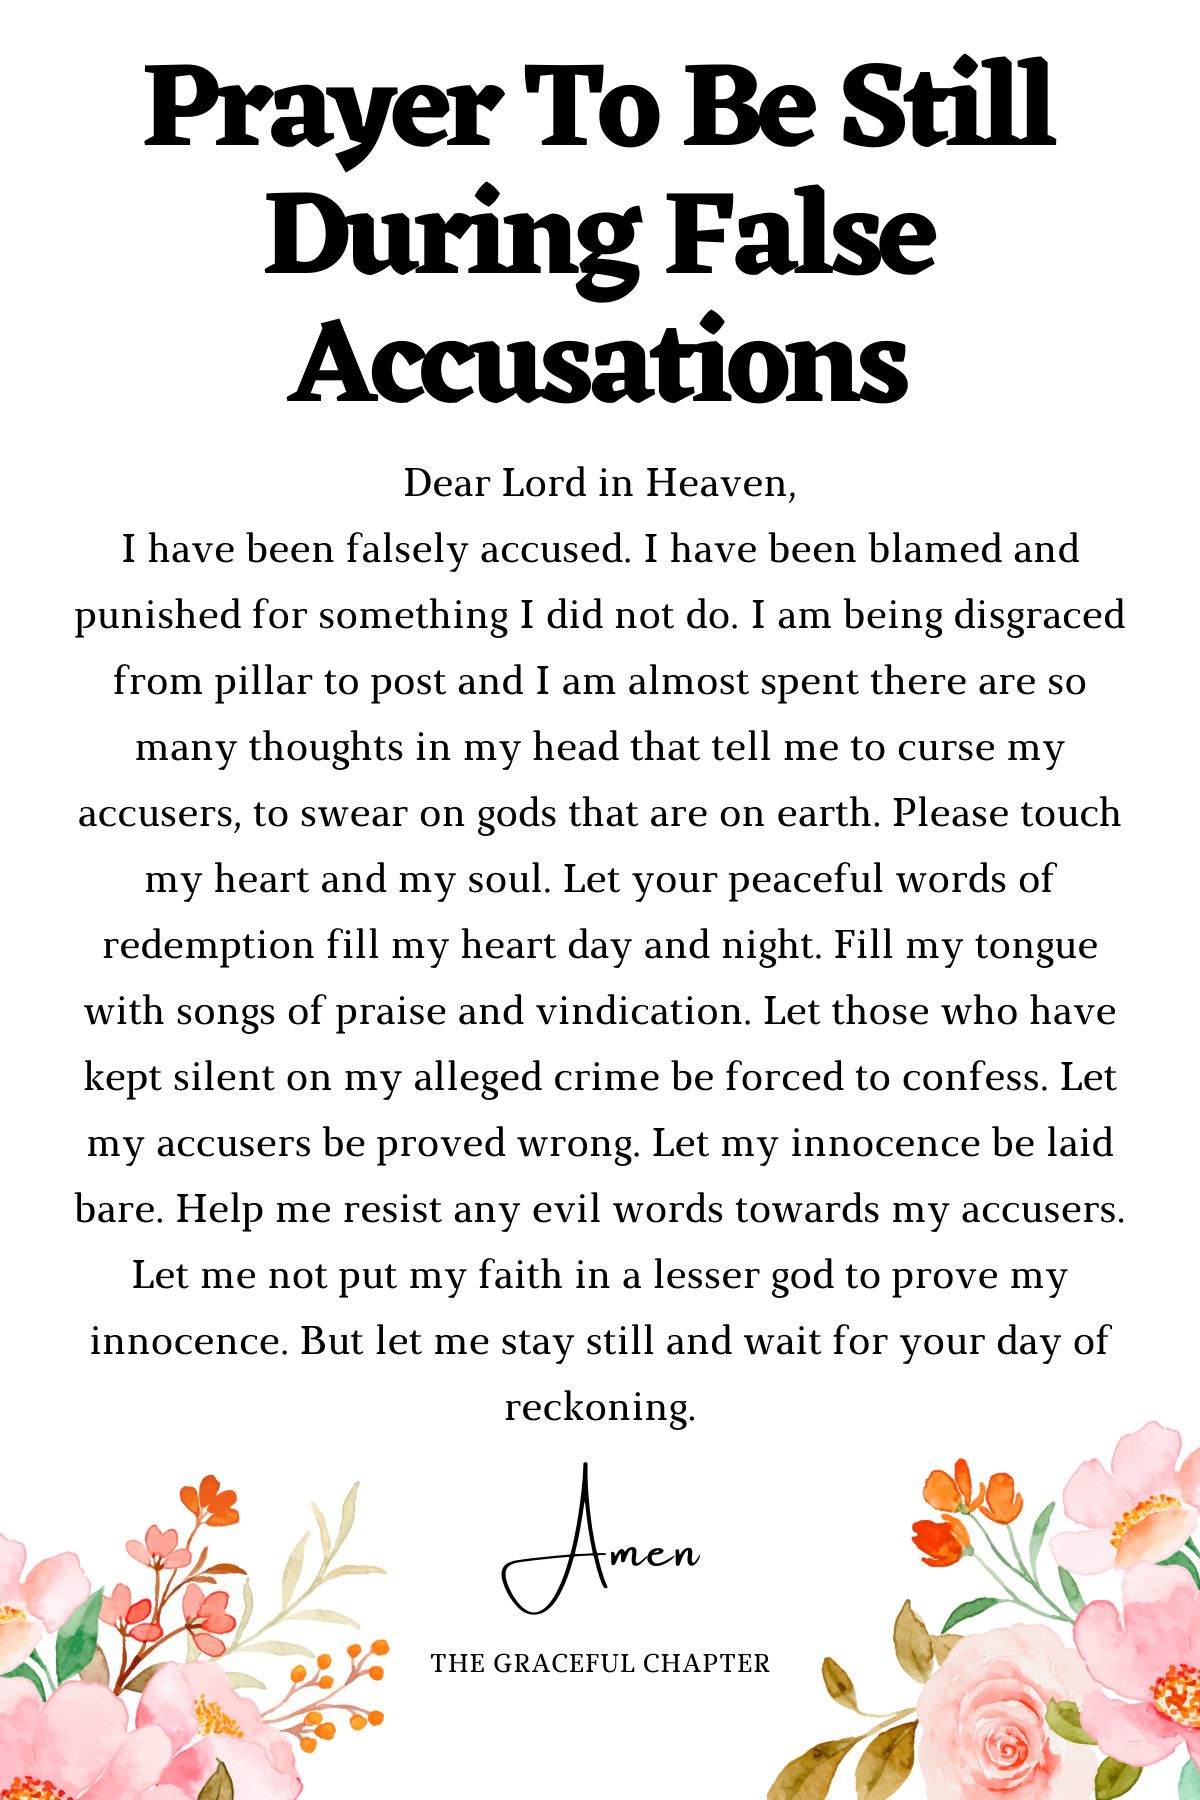 Prayer To Be still during false accusations